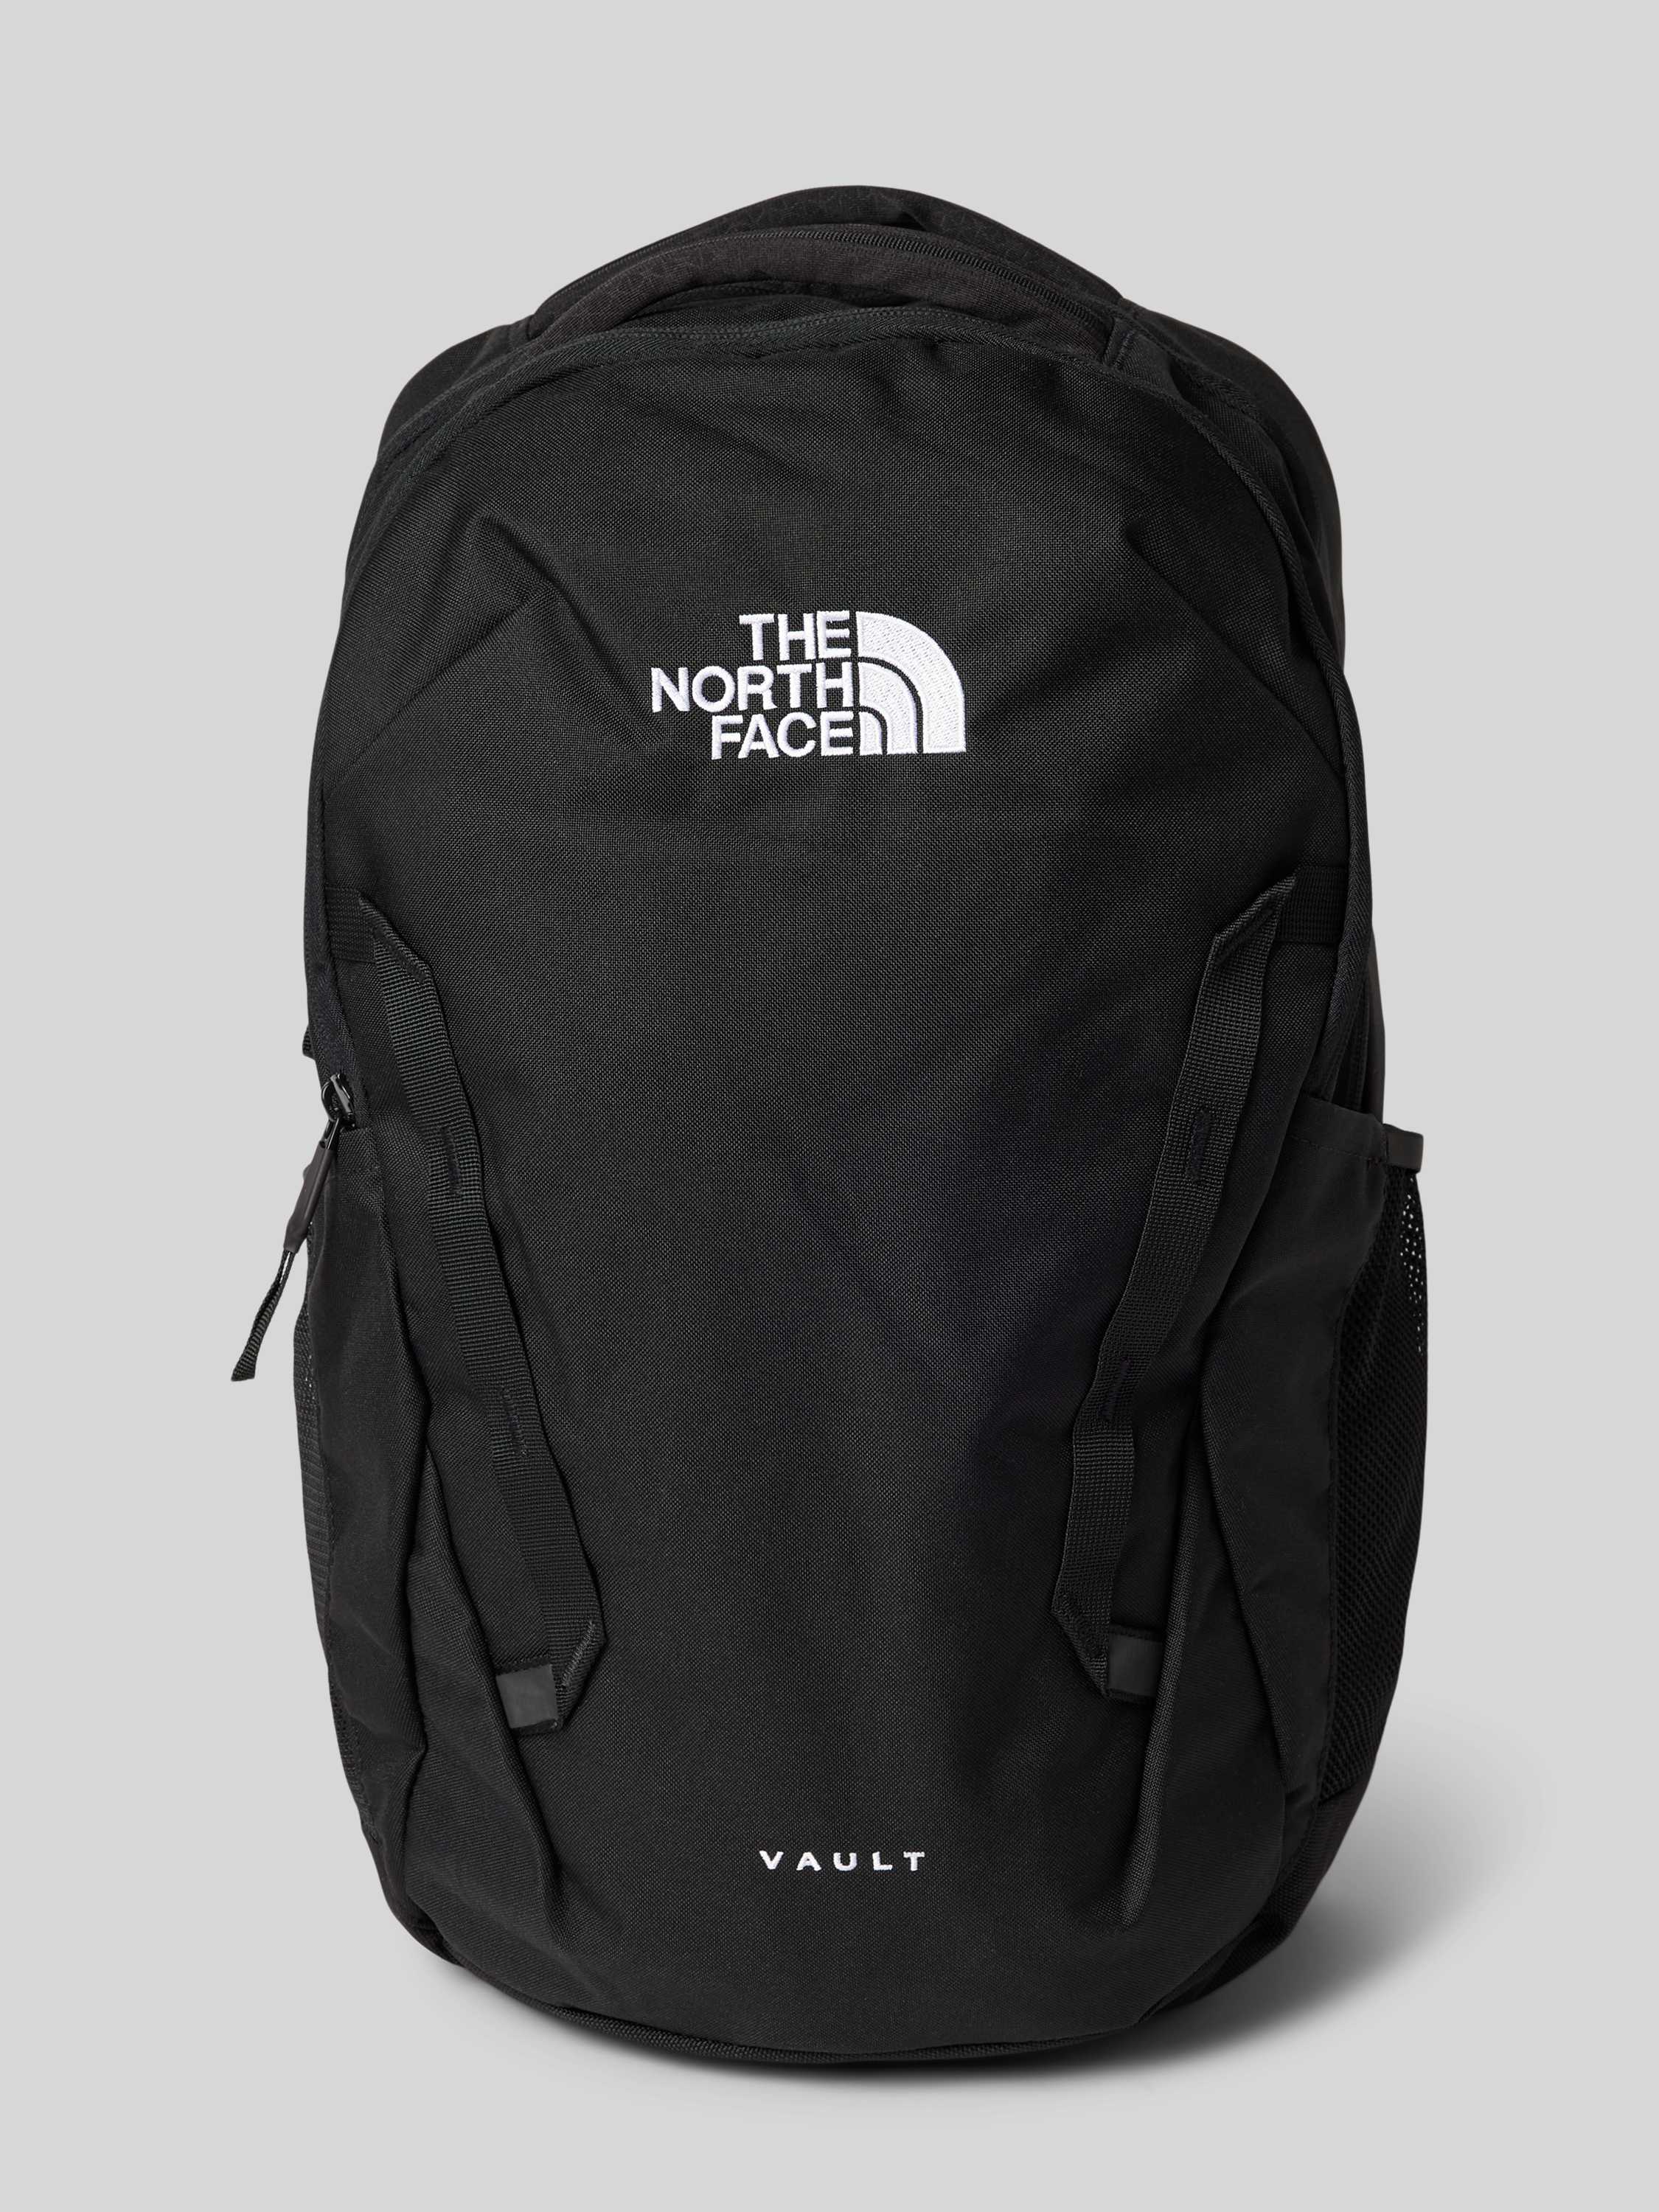 The North Face Rugzak met labelstitching